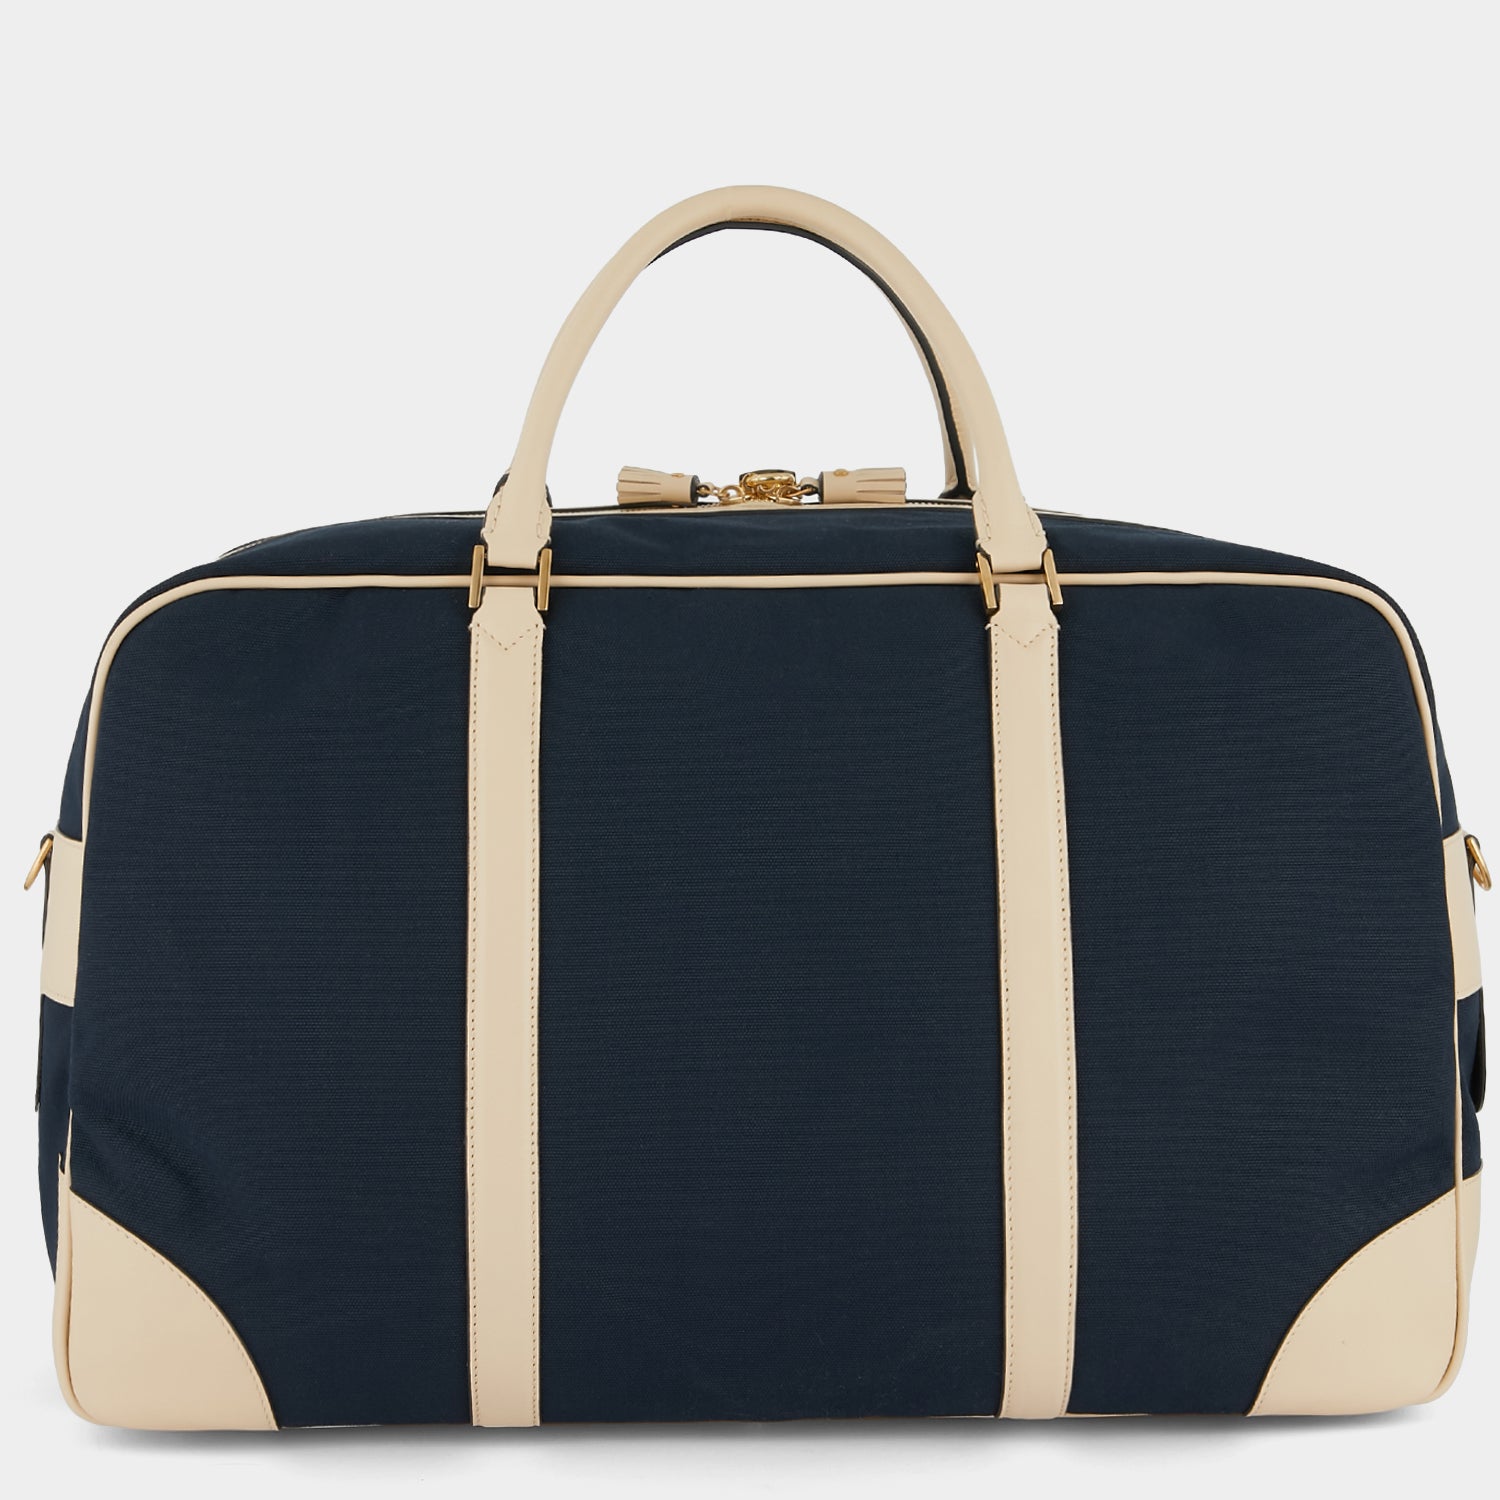 Shop Louis Vuitton Unisex Carry-on Luggage & Travel Bags by